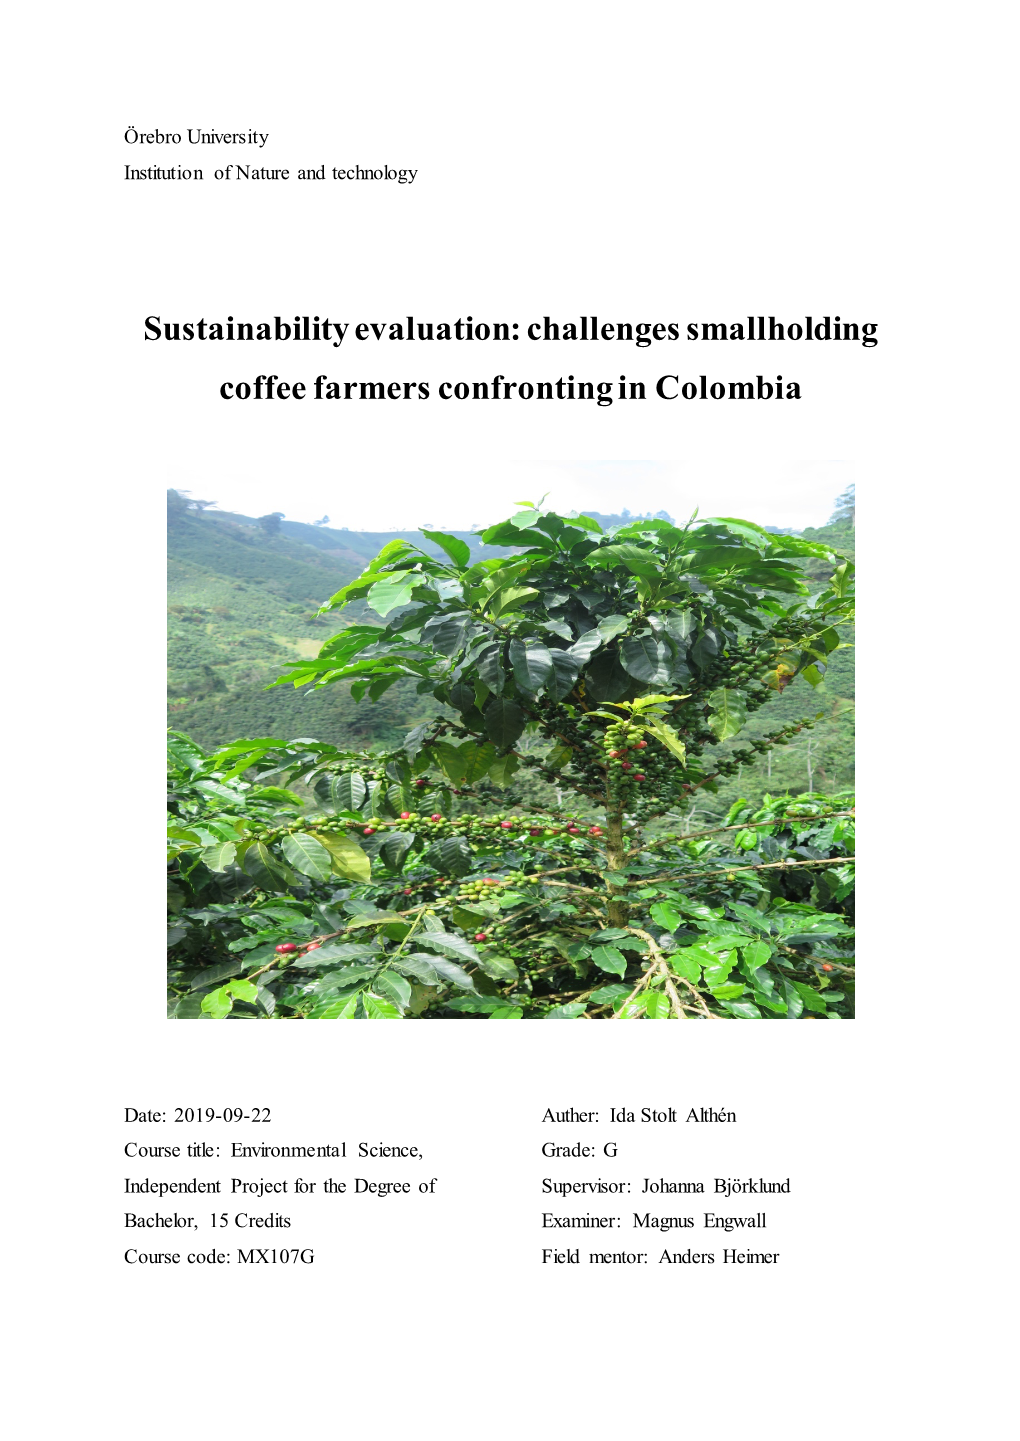 Challenges Smallholding Coffee Farmers Confronting in Colombia